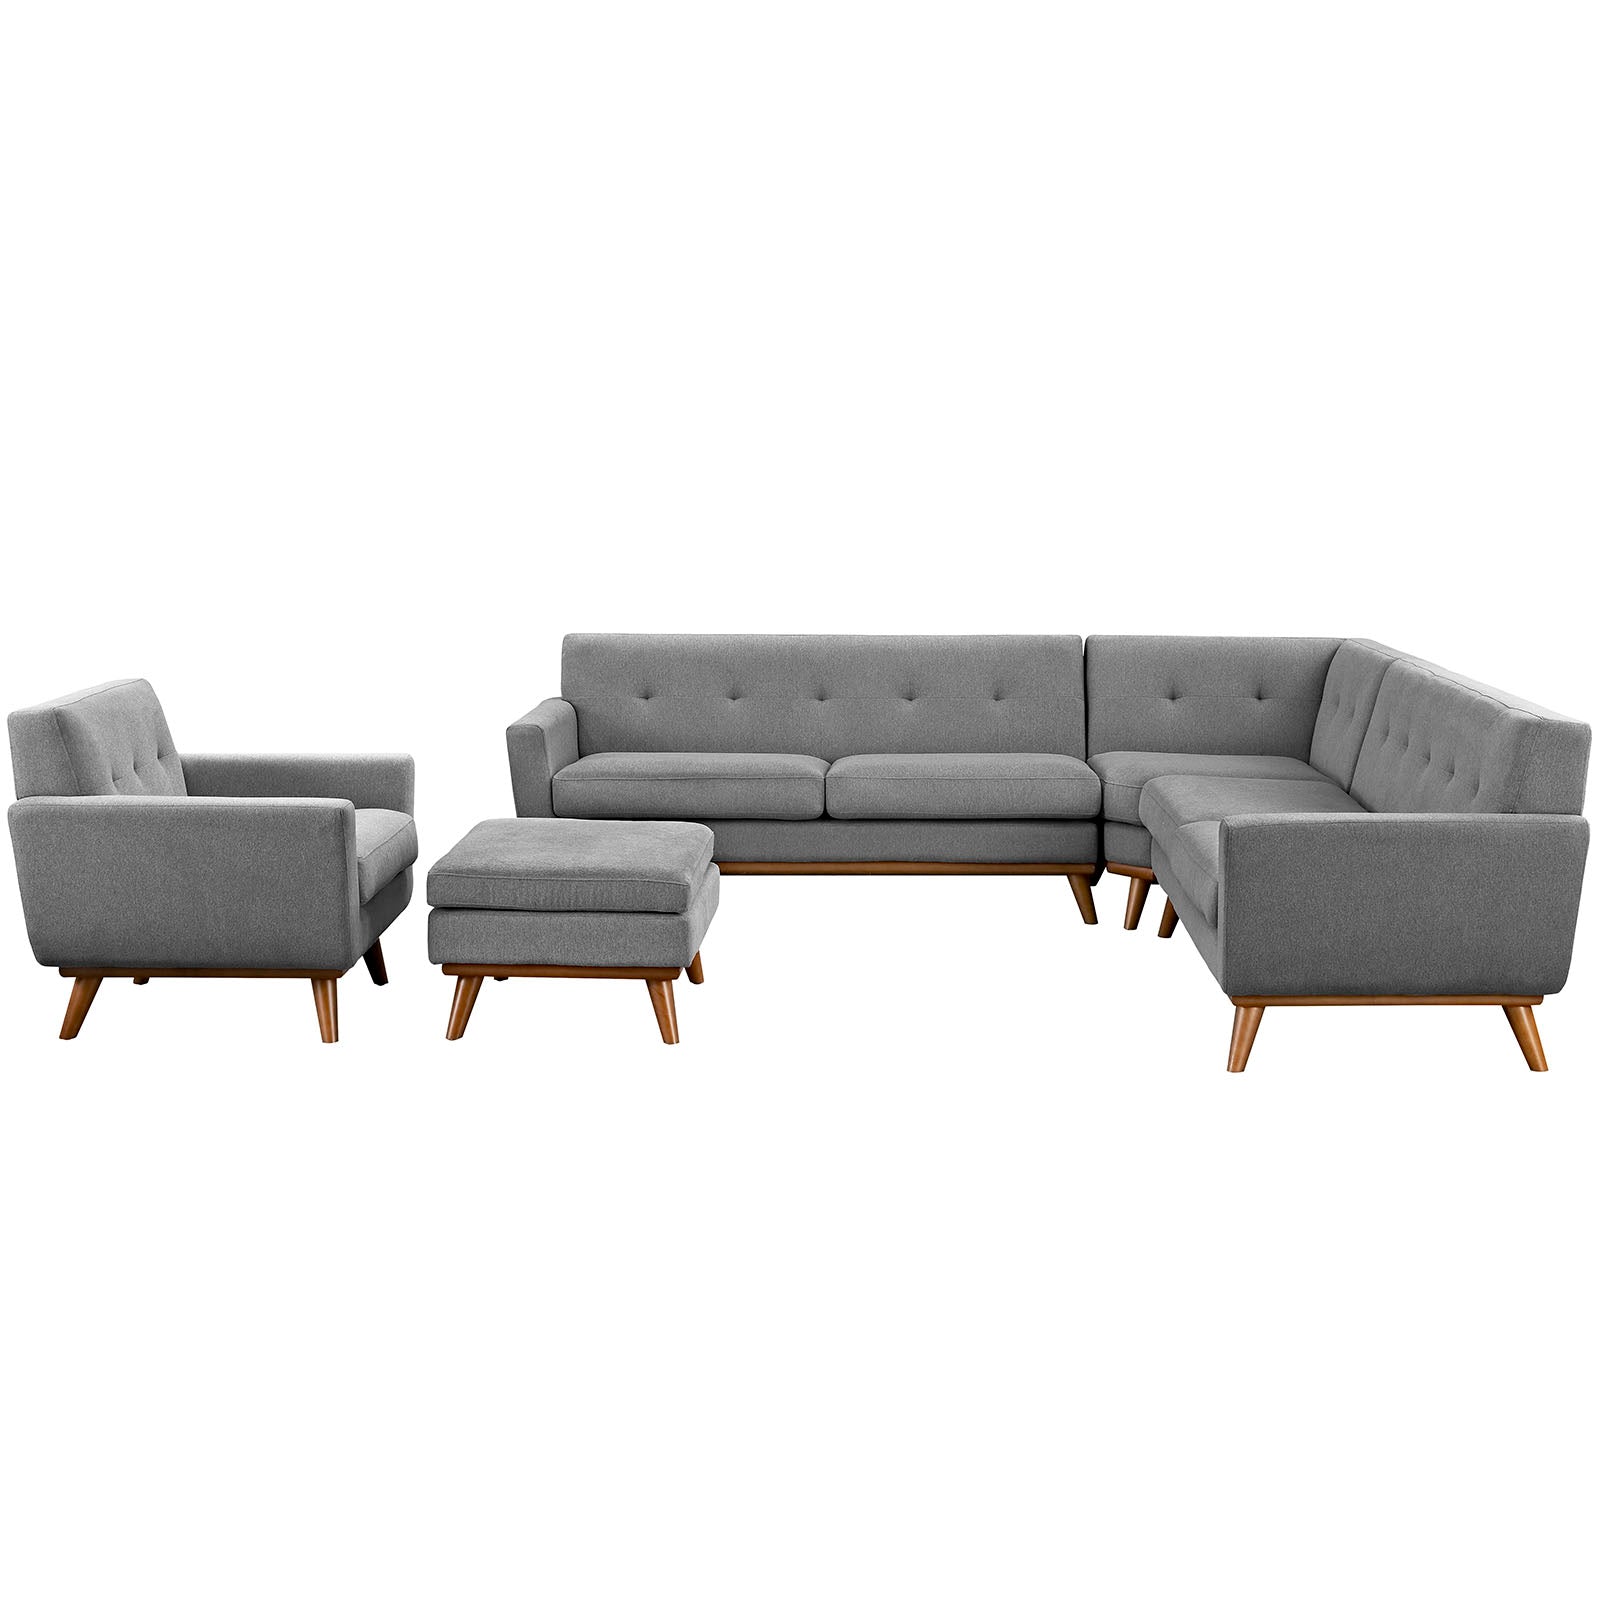 Engage 5 Piece Sectional Sofa